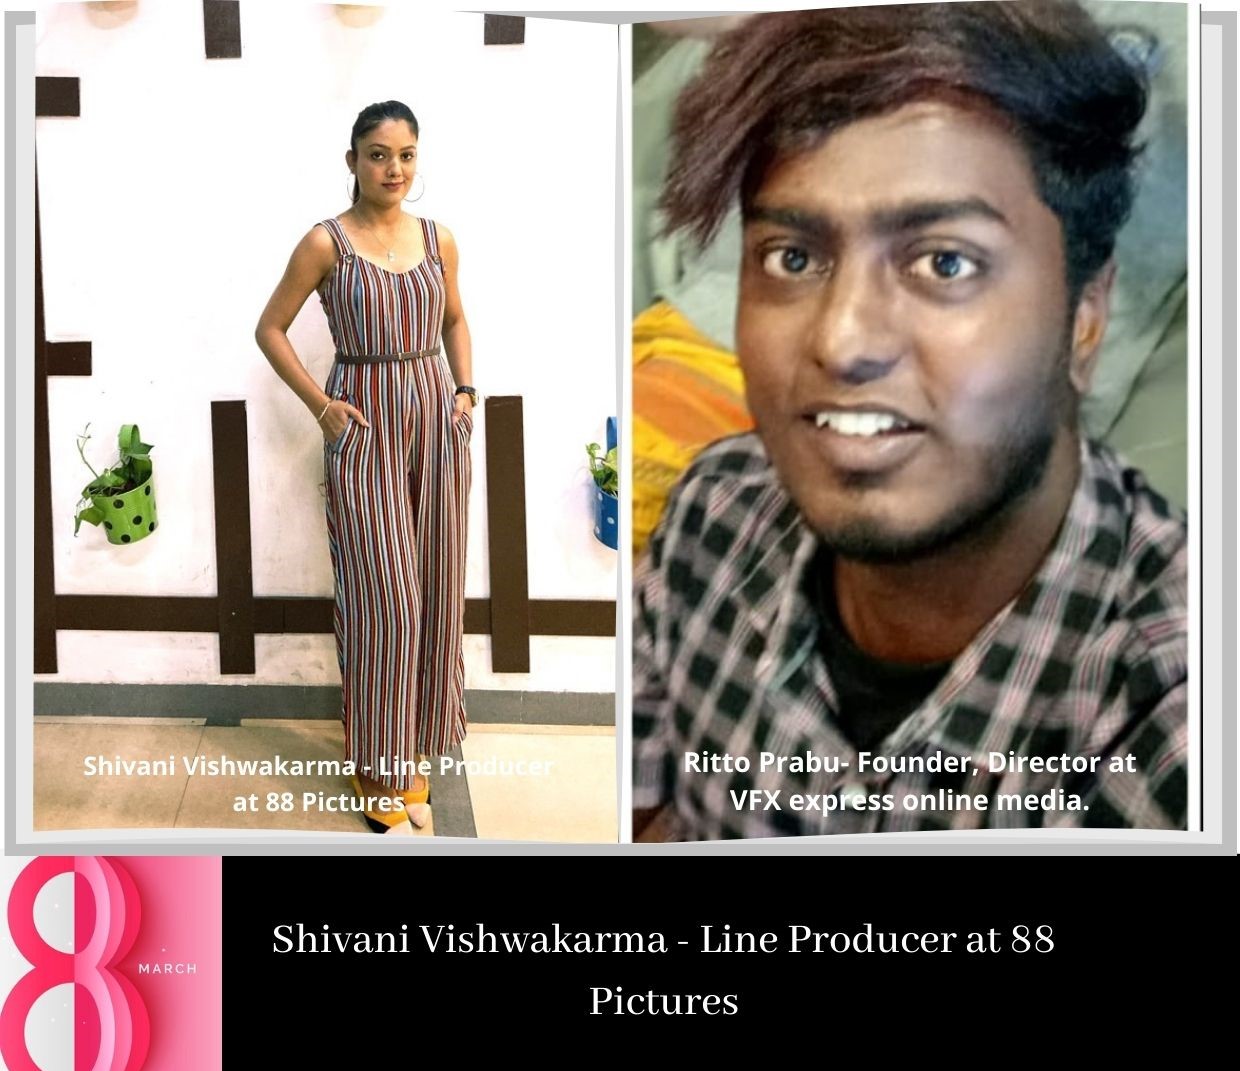 Women’s Day interview with  Shivani Vishwakarma – Line Producer at 88 Pictures